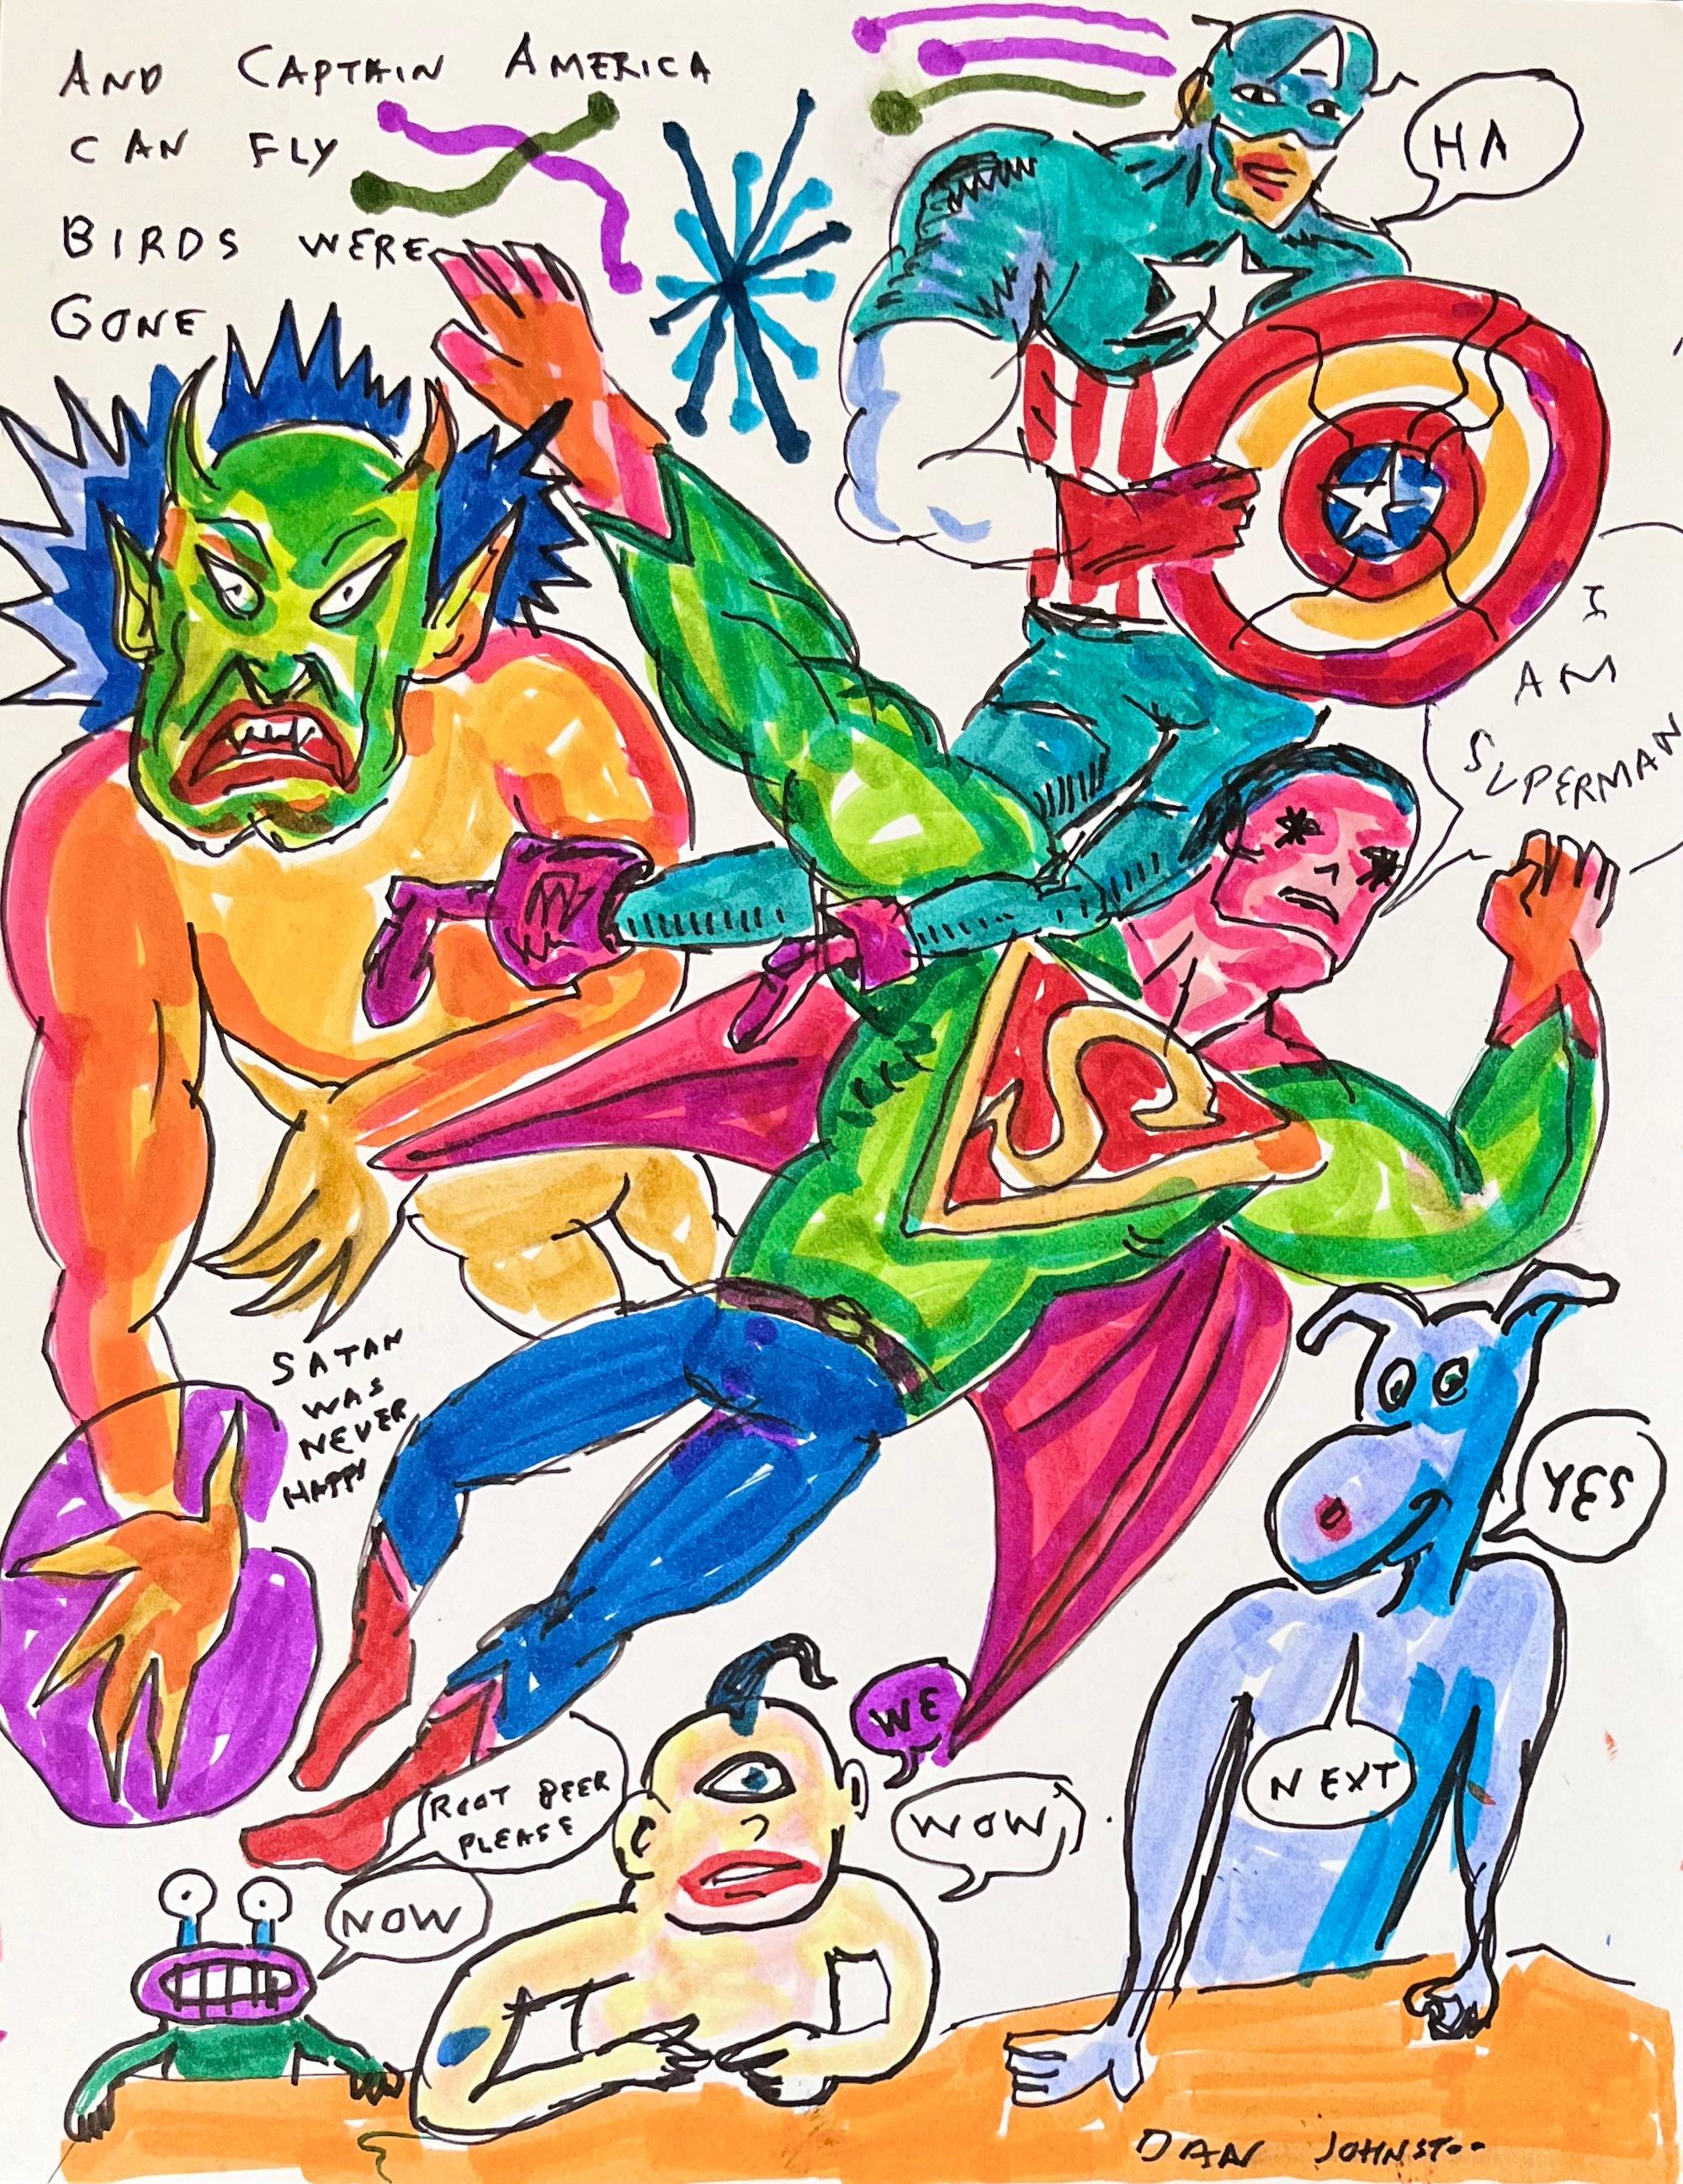 Daniel Johnston Figurative Art - And Captain America Can Fly- Johnston, Figure Ink Drawing on Paper, Outsider Art